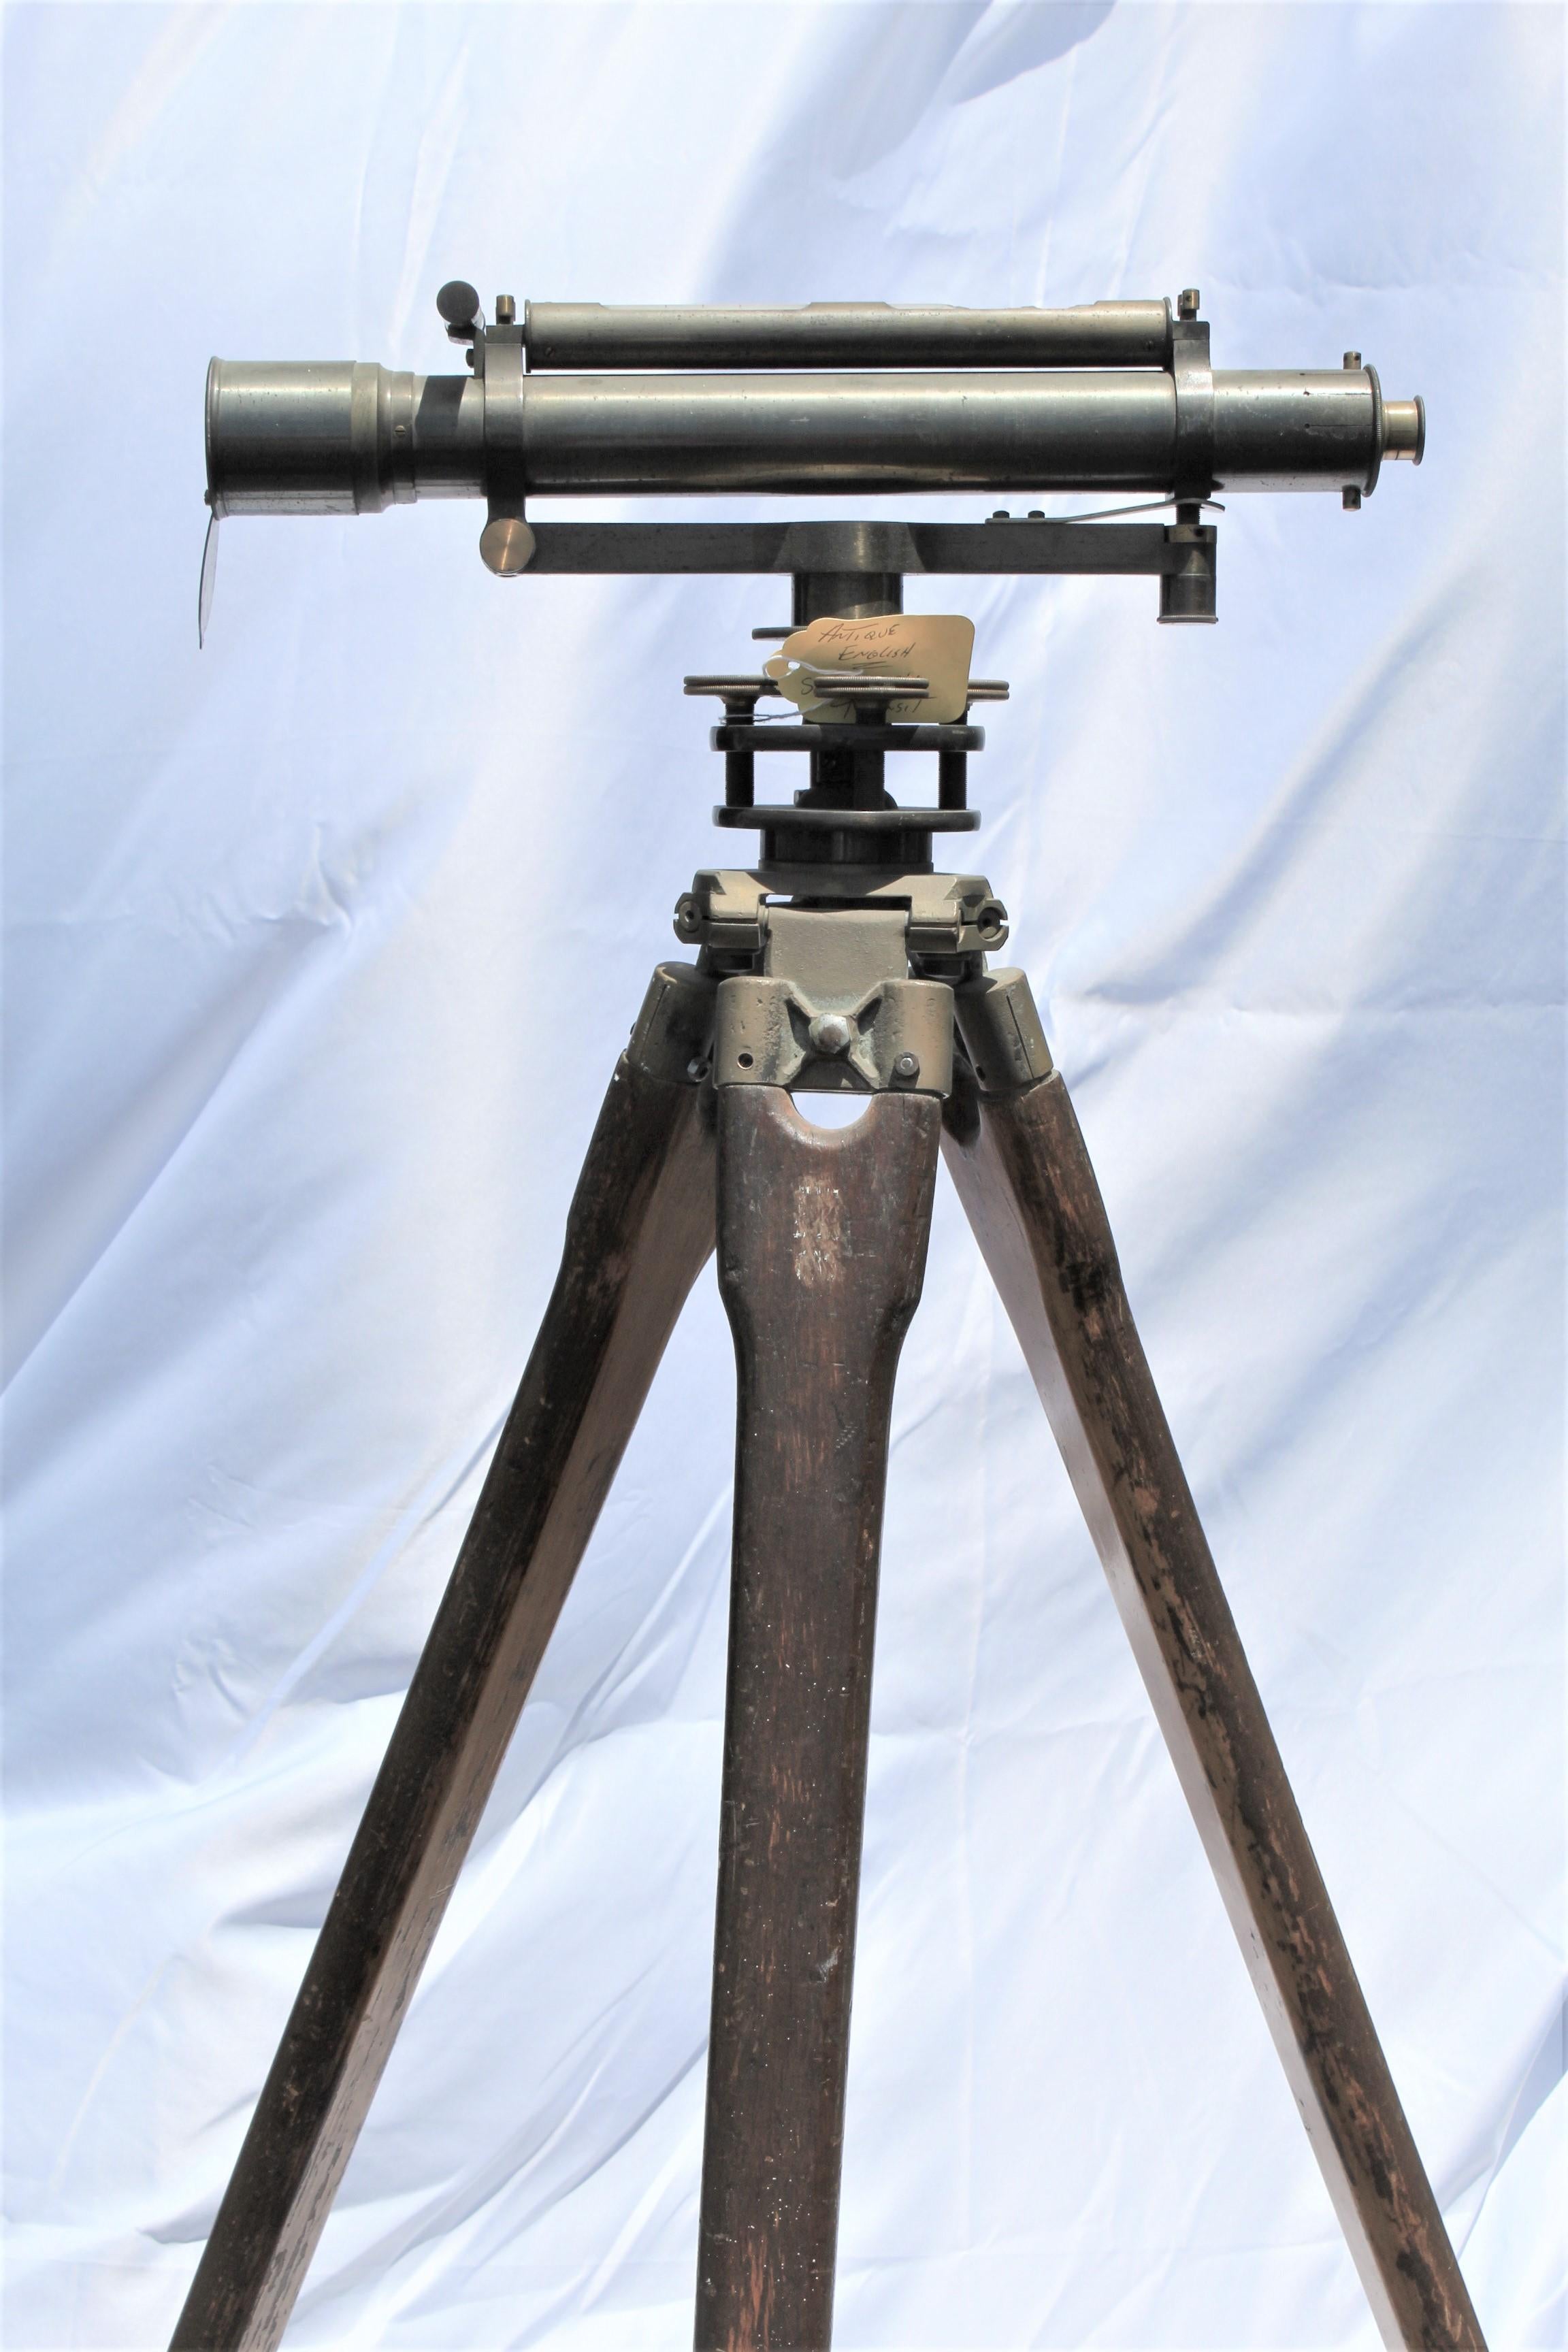 An old Surveyor's Transit from London. All brass and mounted on wood legs. Signed Troughton & Sims. London. All good except for the top glass cover. Could be replaced. Sort of heavy. At 66